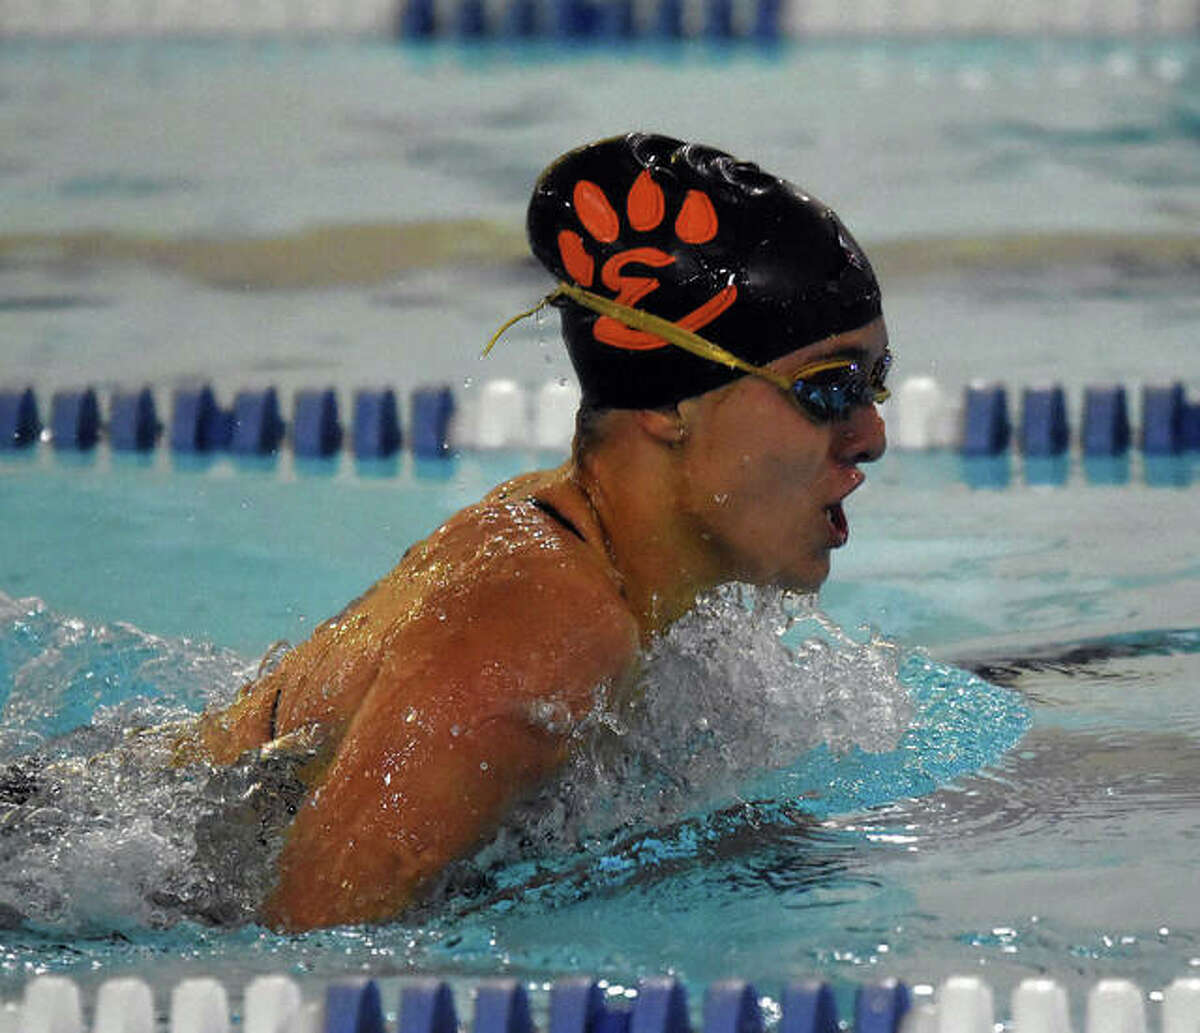 Edwardsville’s Ally Janson competes in the 100-yard breaststroke on Saturday at the Chuck Fruit Aquatic Center.